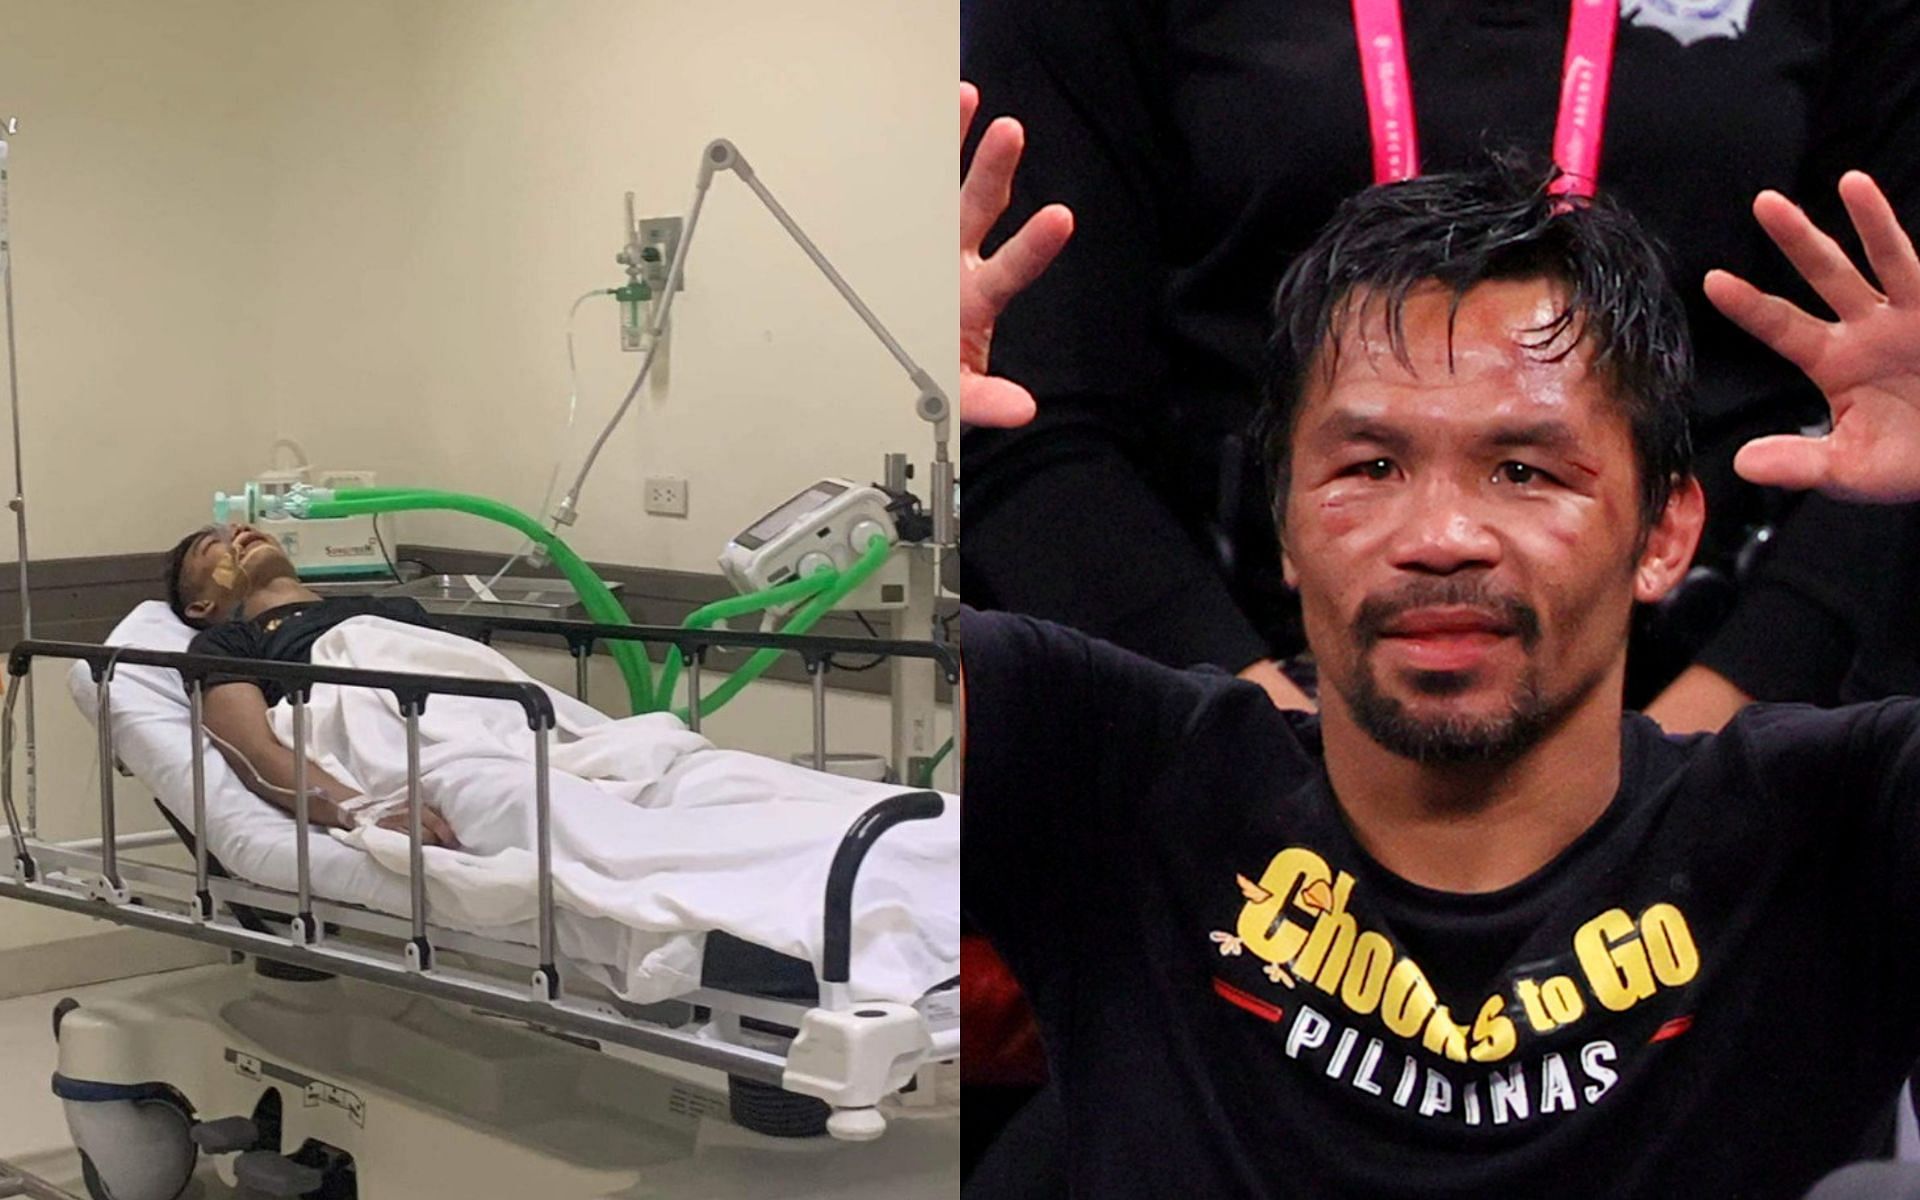 Kenneth Egano hospitalized [Left] Manny Pacquiao [Right] [Images courtesy: @RMNSportsCenter and @MMAFIghting (Twitter)]